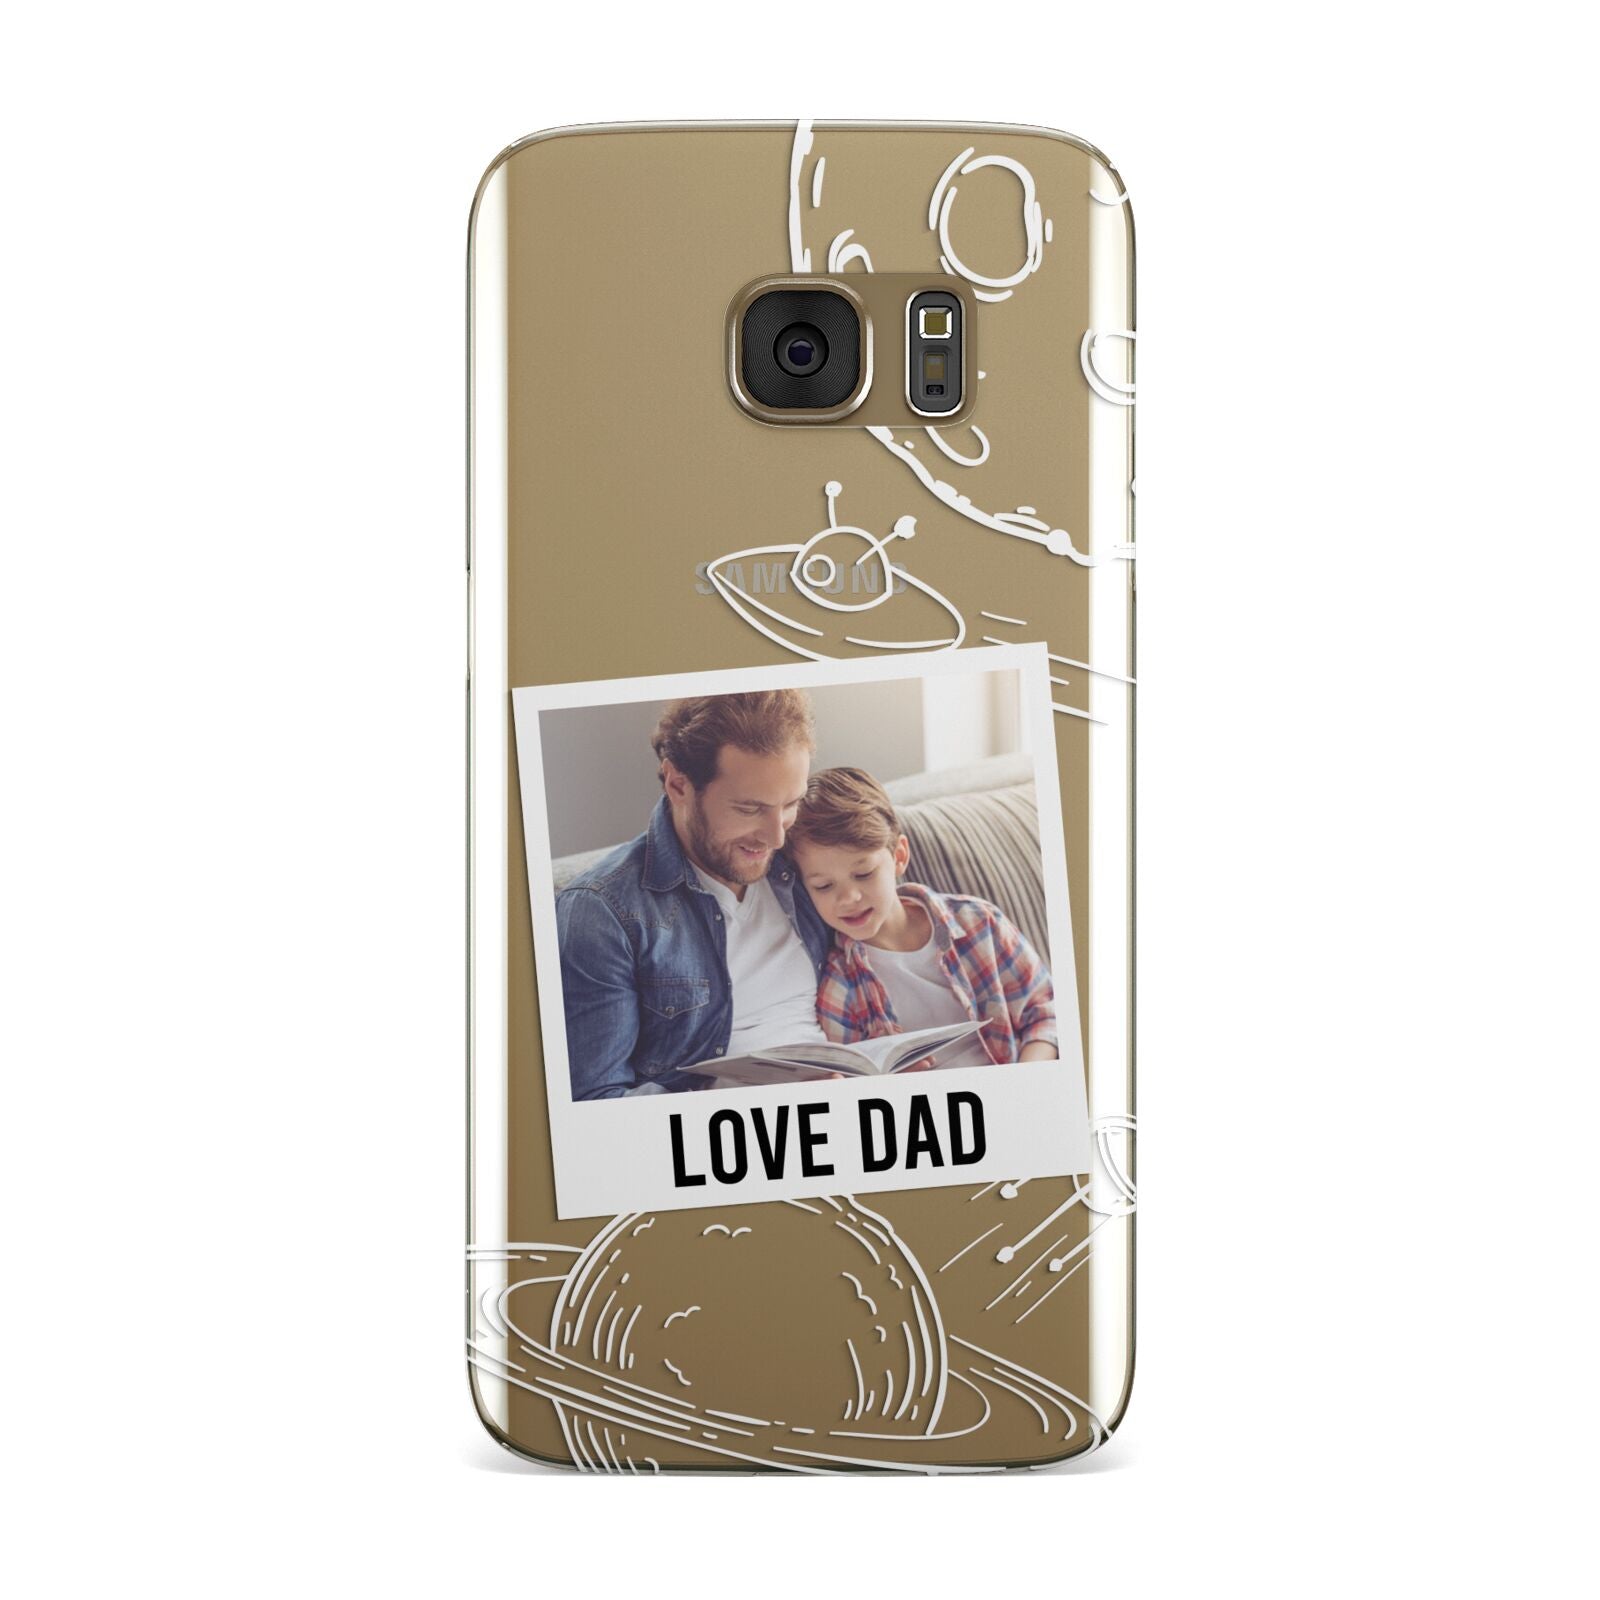 Personalised From Dad Photo Samsung Galaxy Case